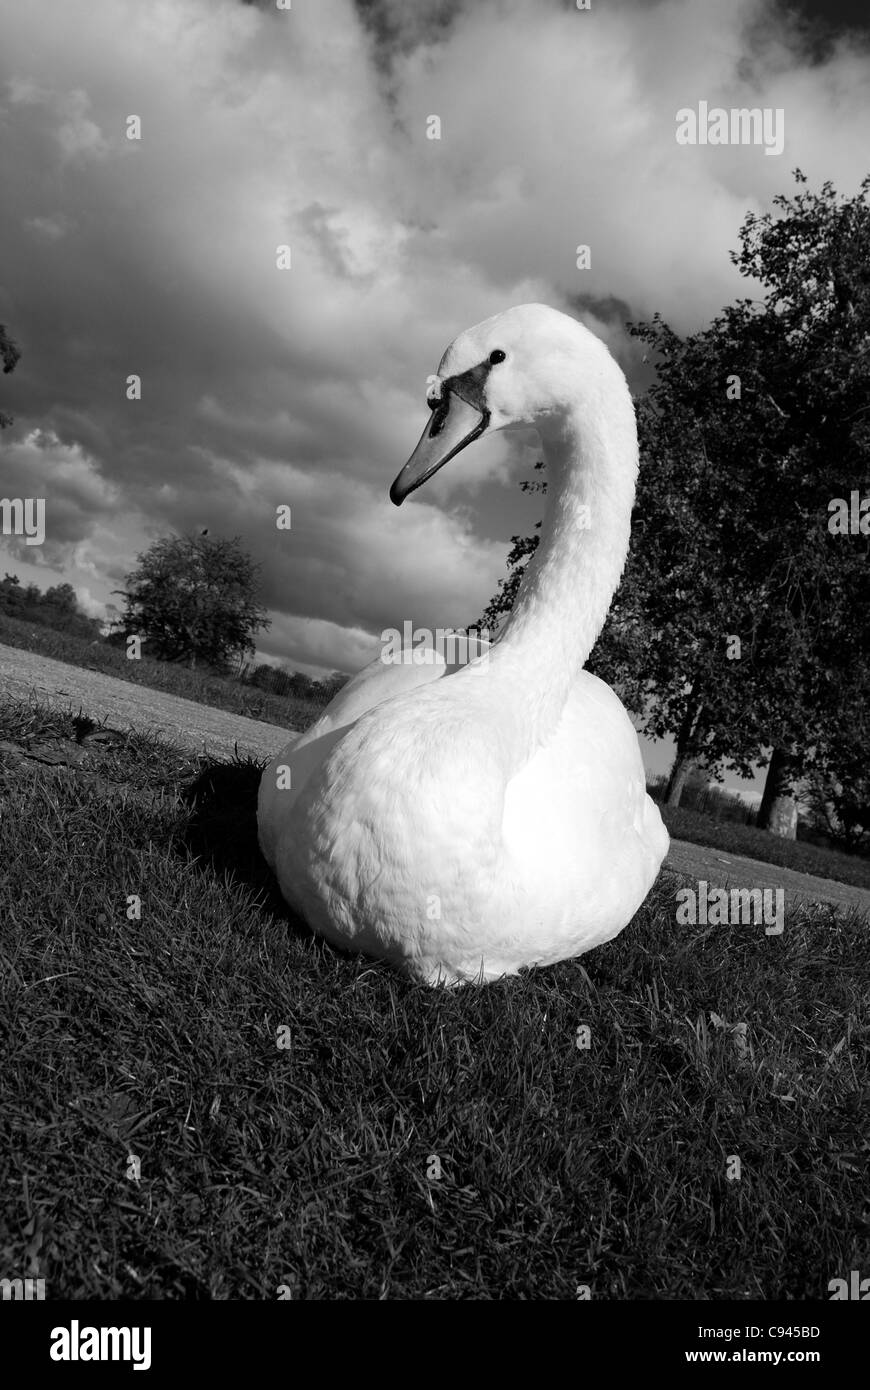 Swans feathers Black and White Stock Photos & Images - Alamy